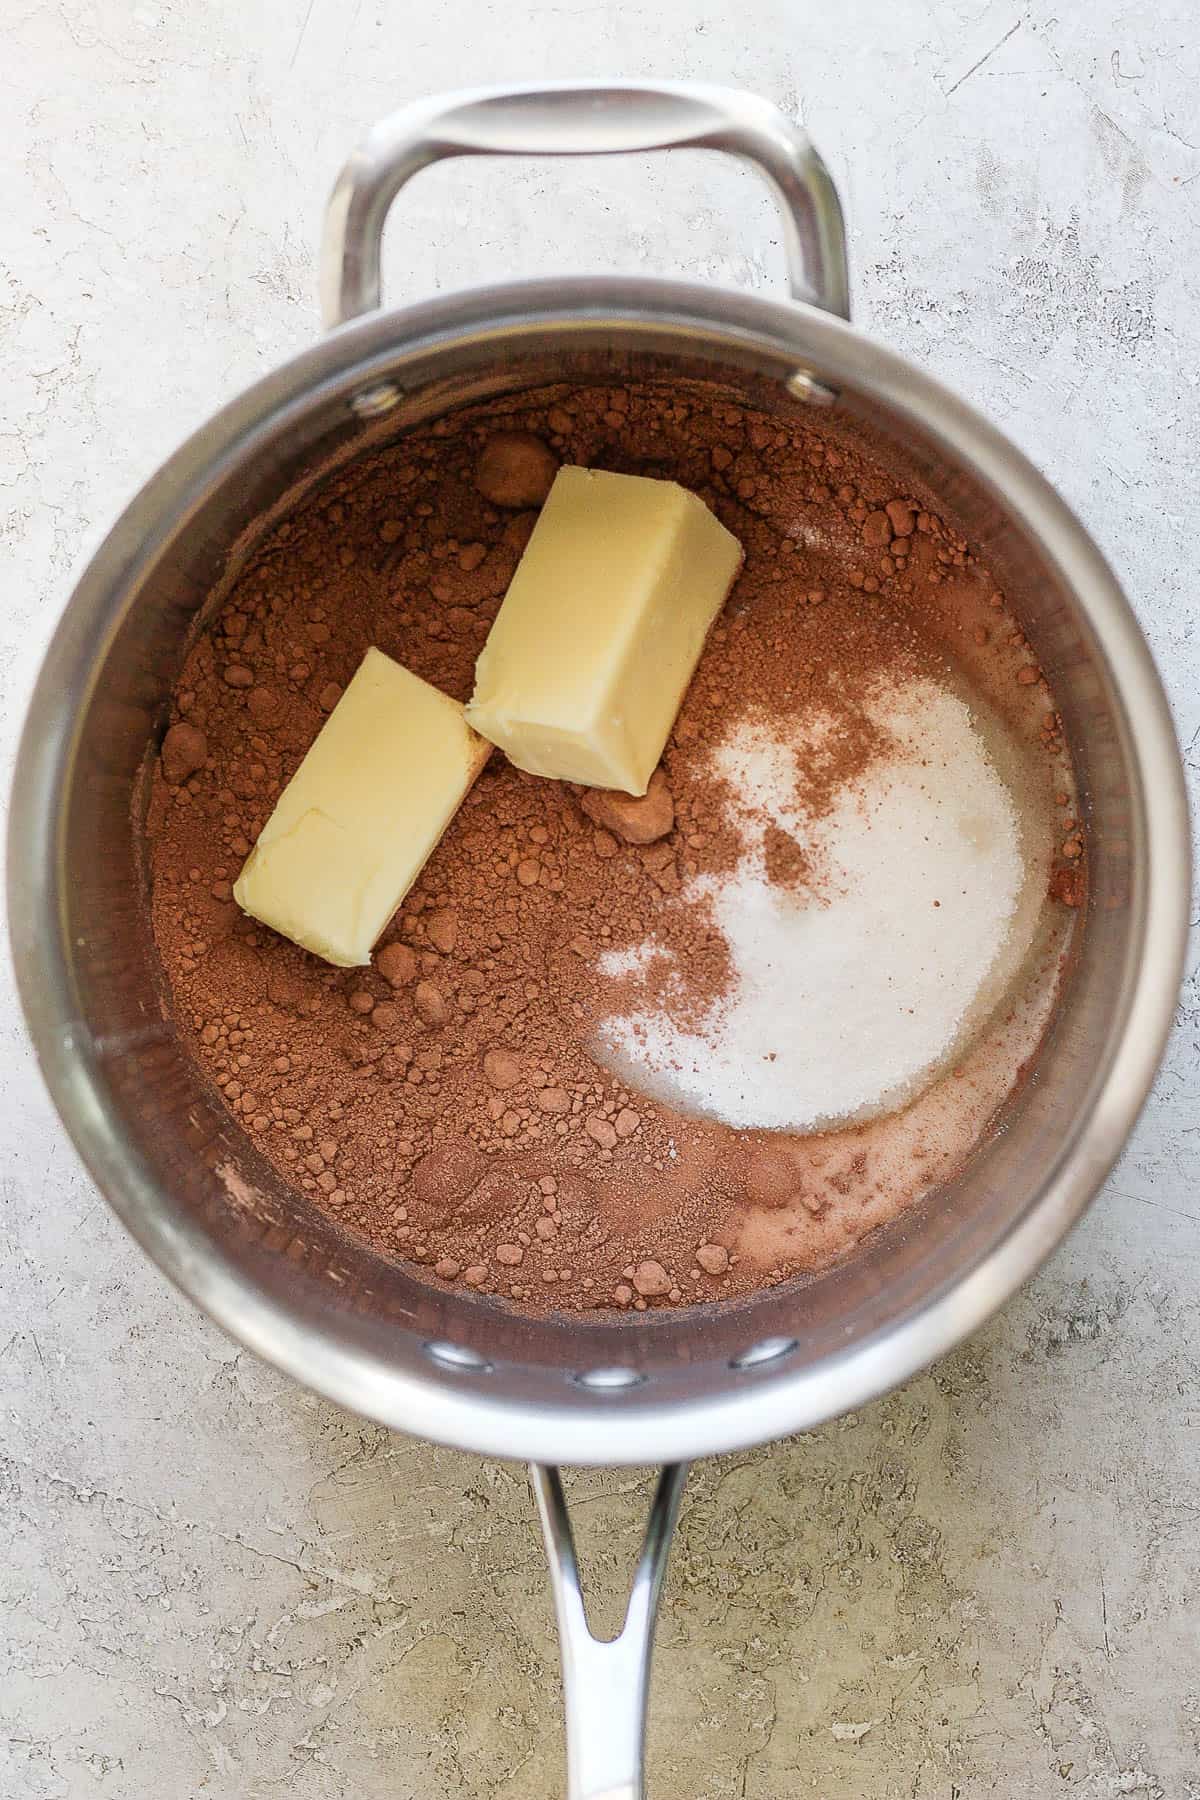 Milk, butter, and cocoa powder in a sauce pan.